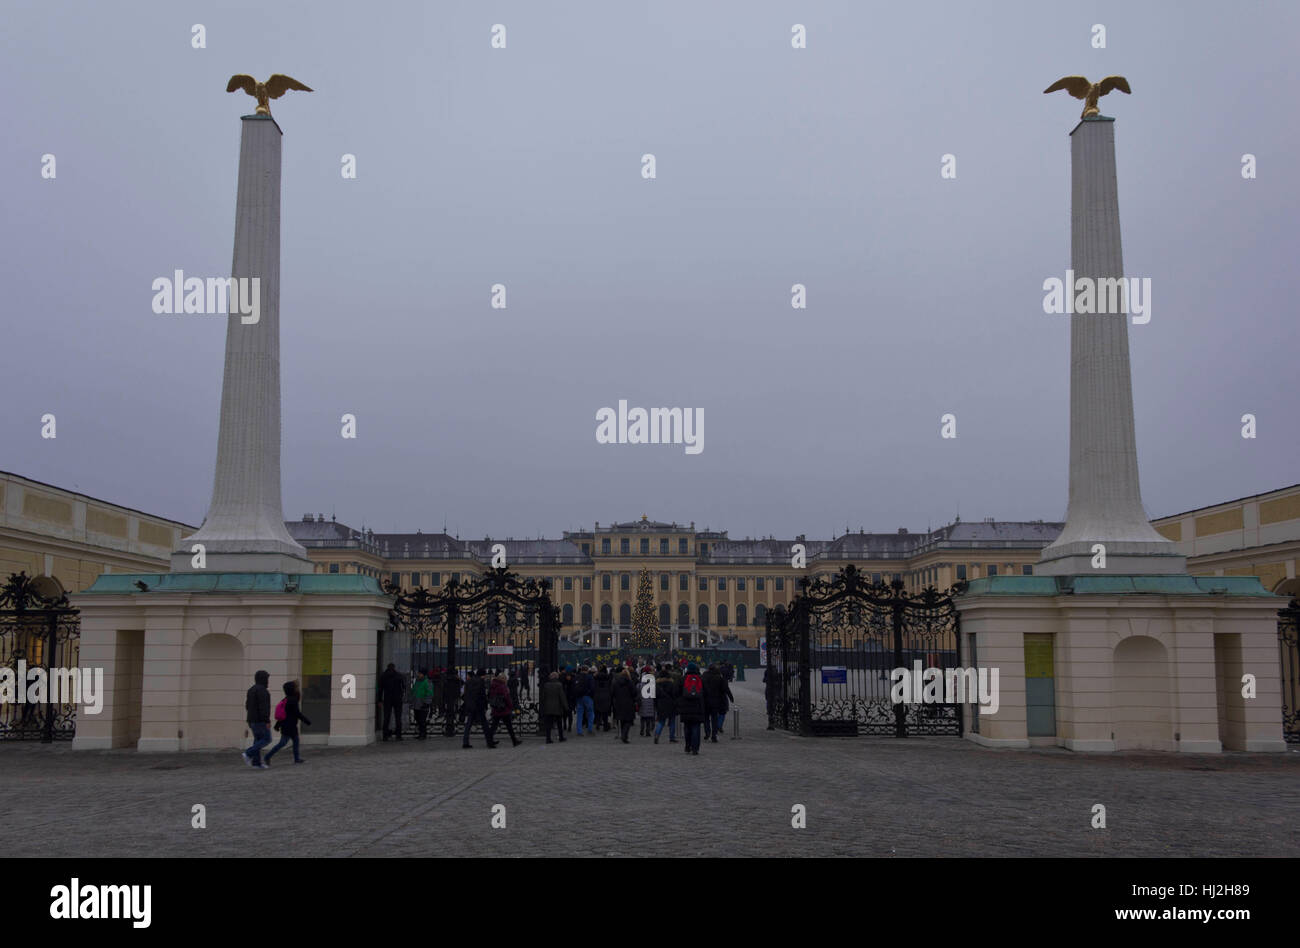 VIENNA, AUSTRIA - JANUARY 2 2016: View from the street of Schonbrunn Palace in Vienna in a foggy winter day, with people and a Christmas tree in the m Stock Photo